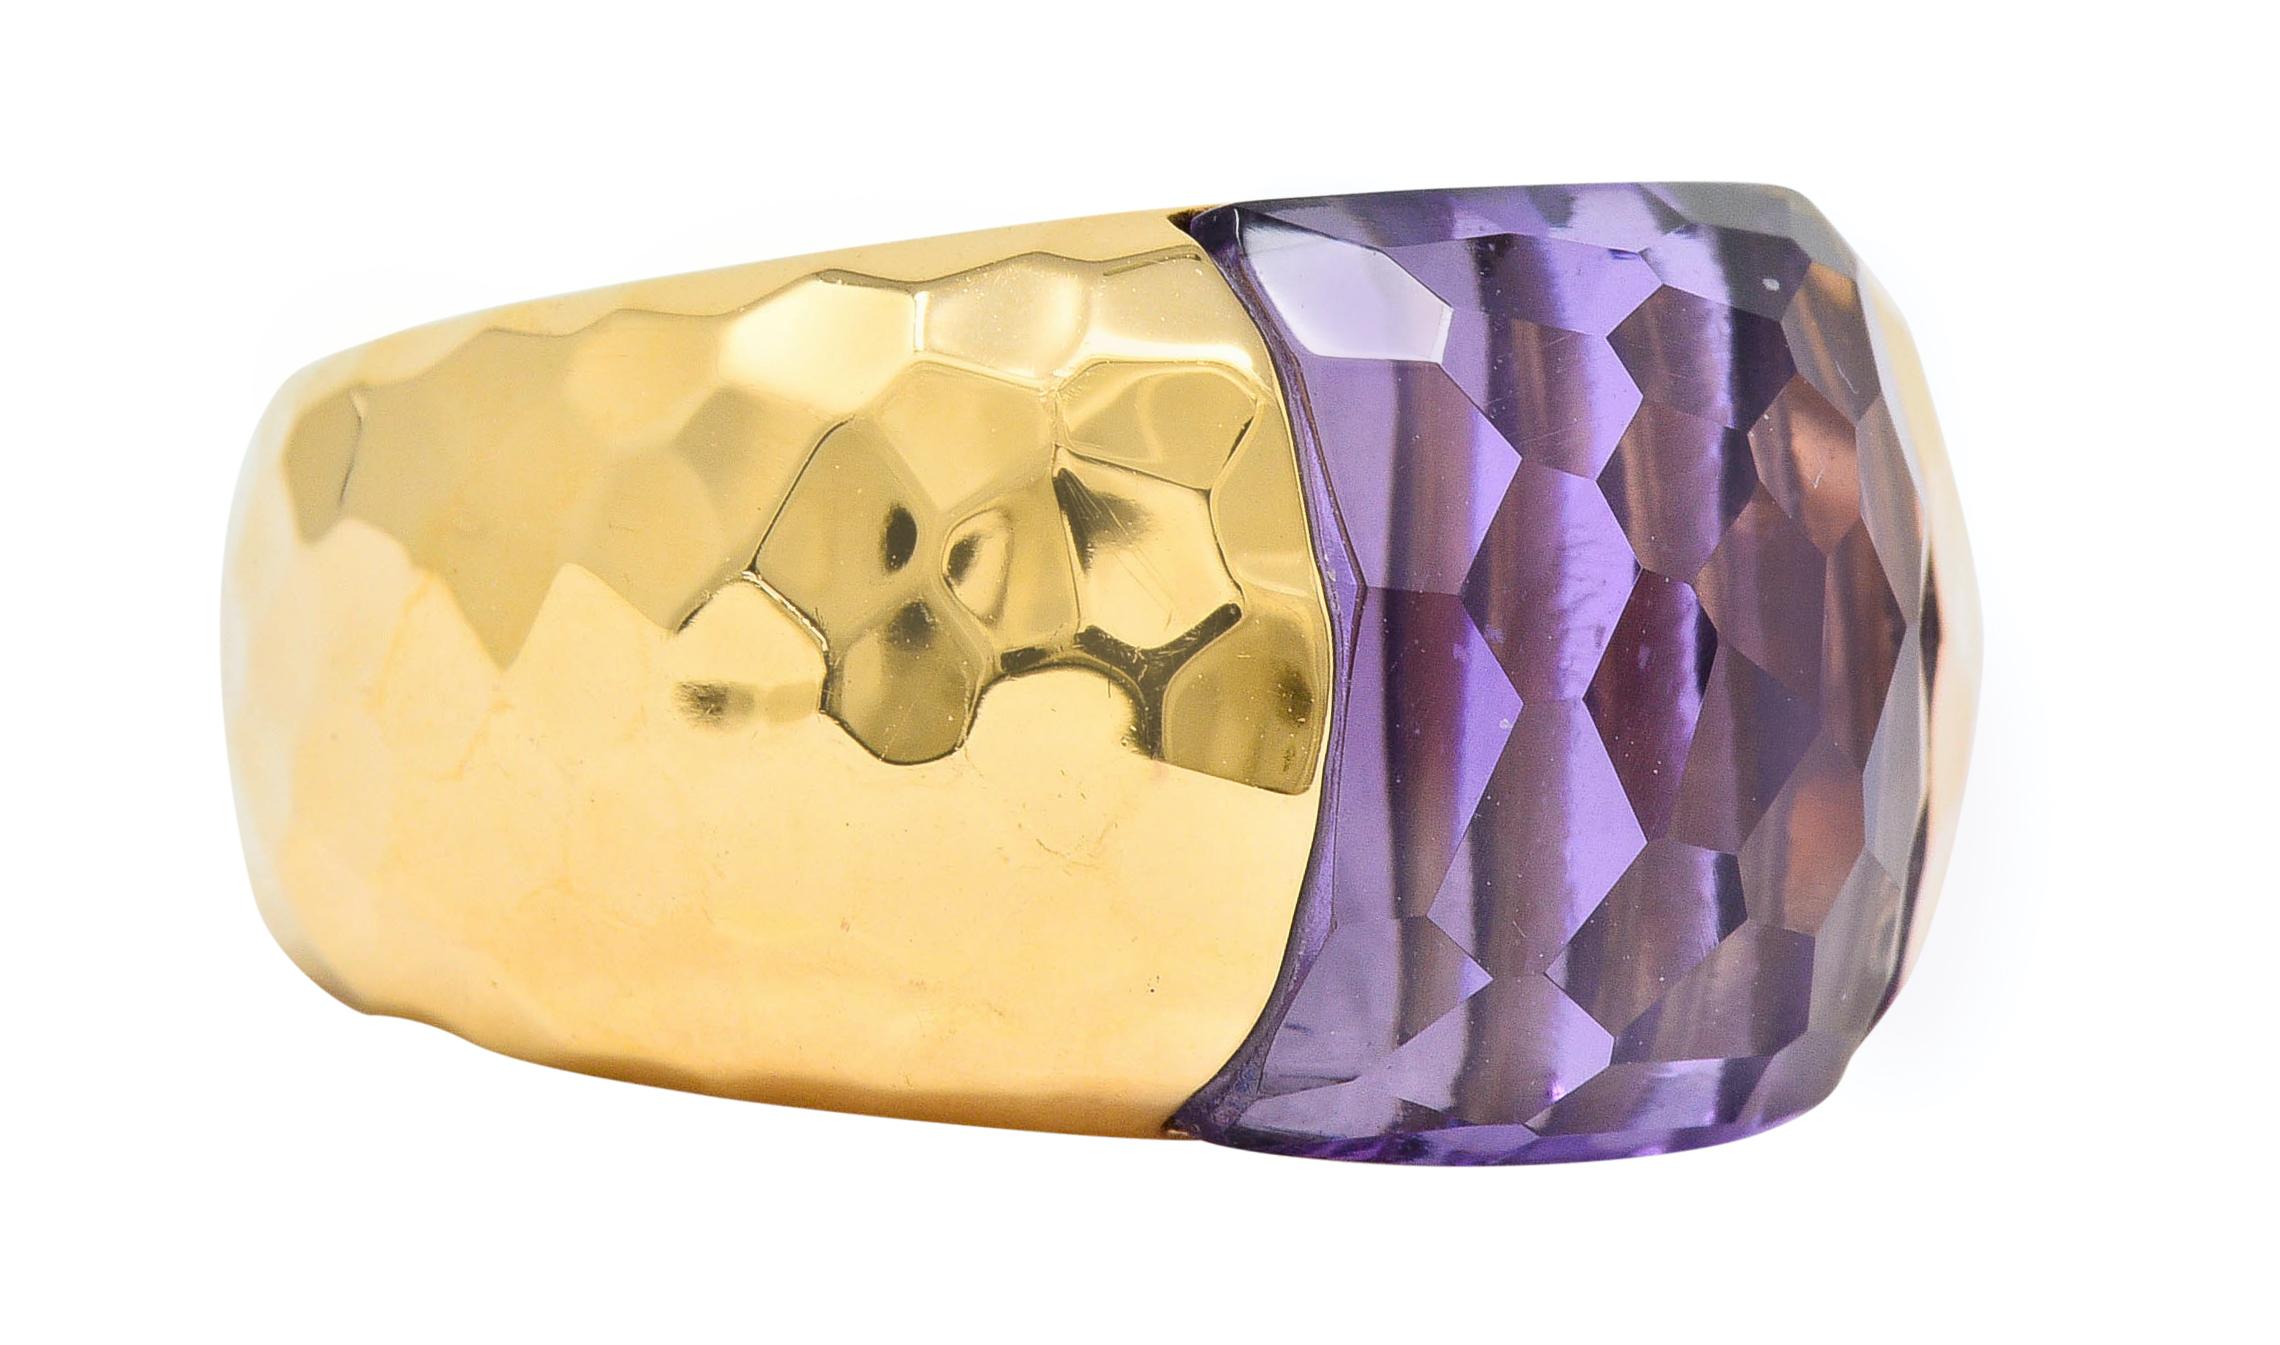 Band ring features a strongly hammered finish and a flushly set mixed cut amethyst

Transparent and very light purple in color and measures approximately 12.2 x 12.2 mm

Stamped with Italian assay marks for 18 karat gold

Fully signed Roberto Coin